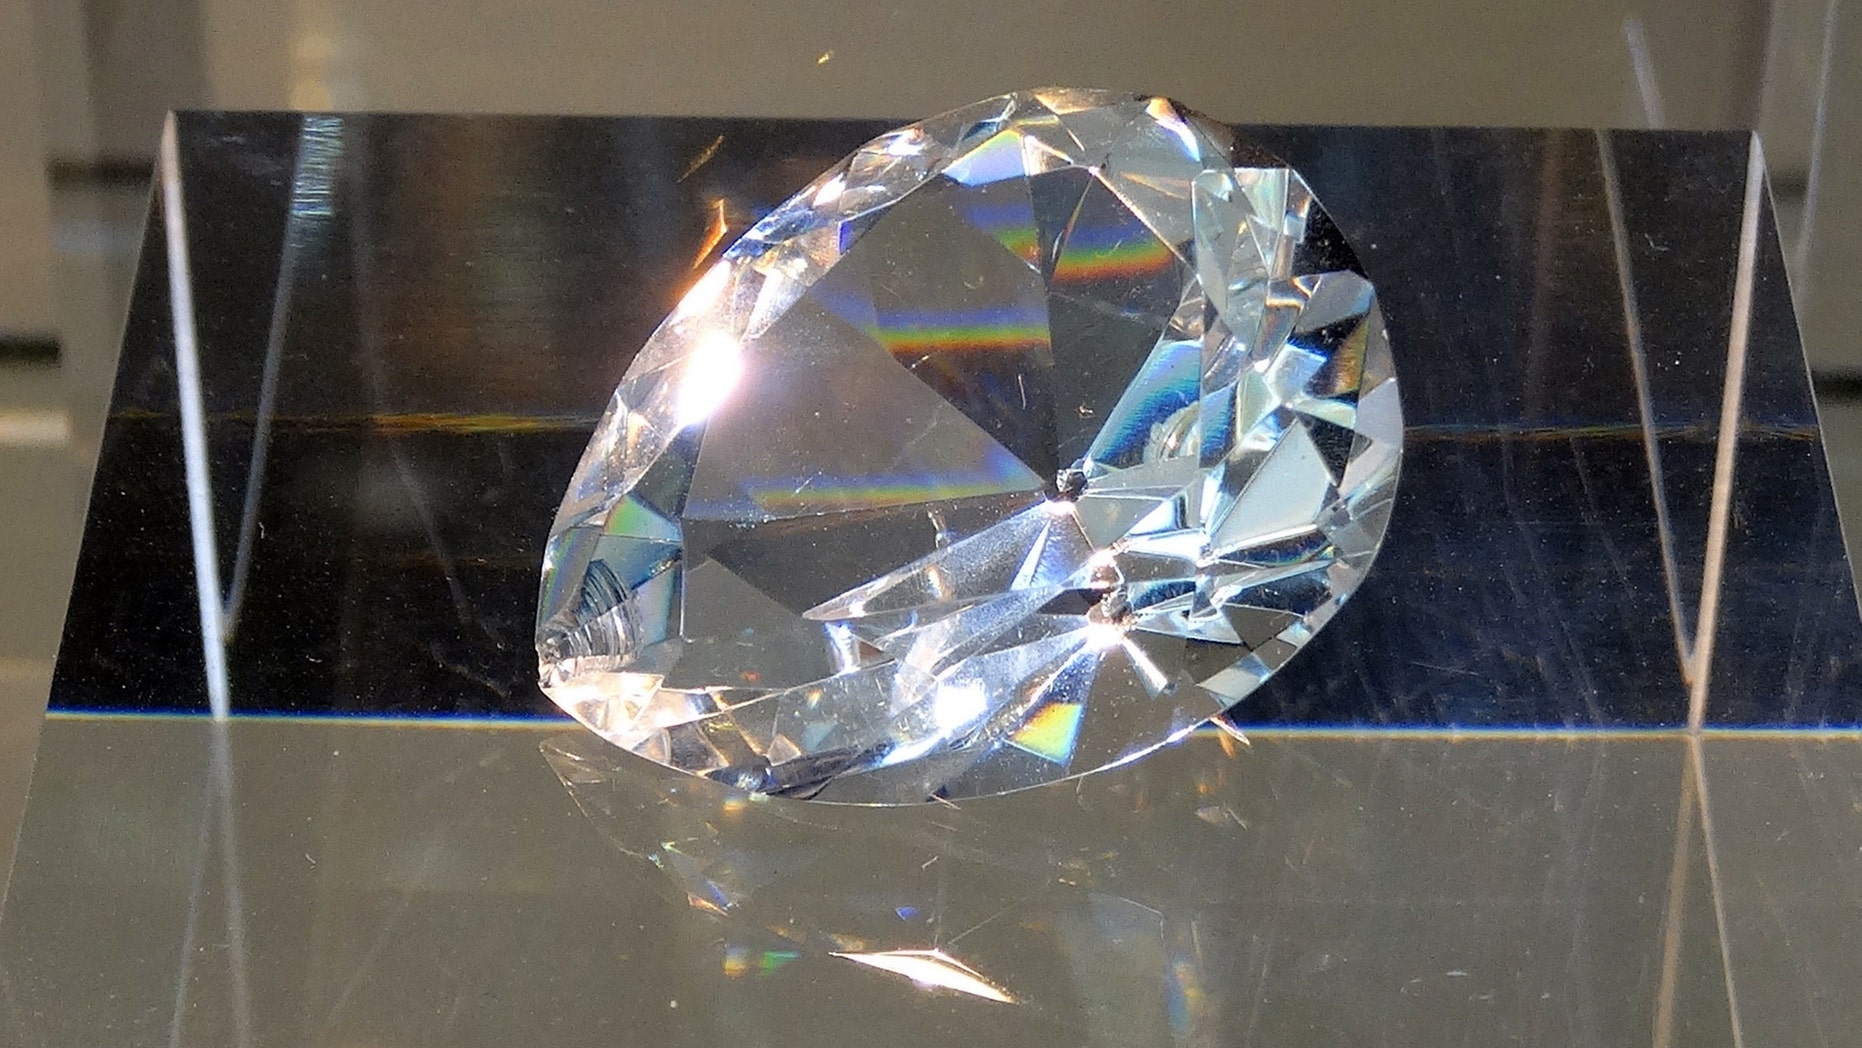 Cullinan V Diamond. A Cullinan Diamond found in South Africa and measured at 18.85 Carats. Dated 2014 - file photo.